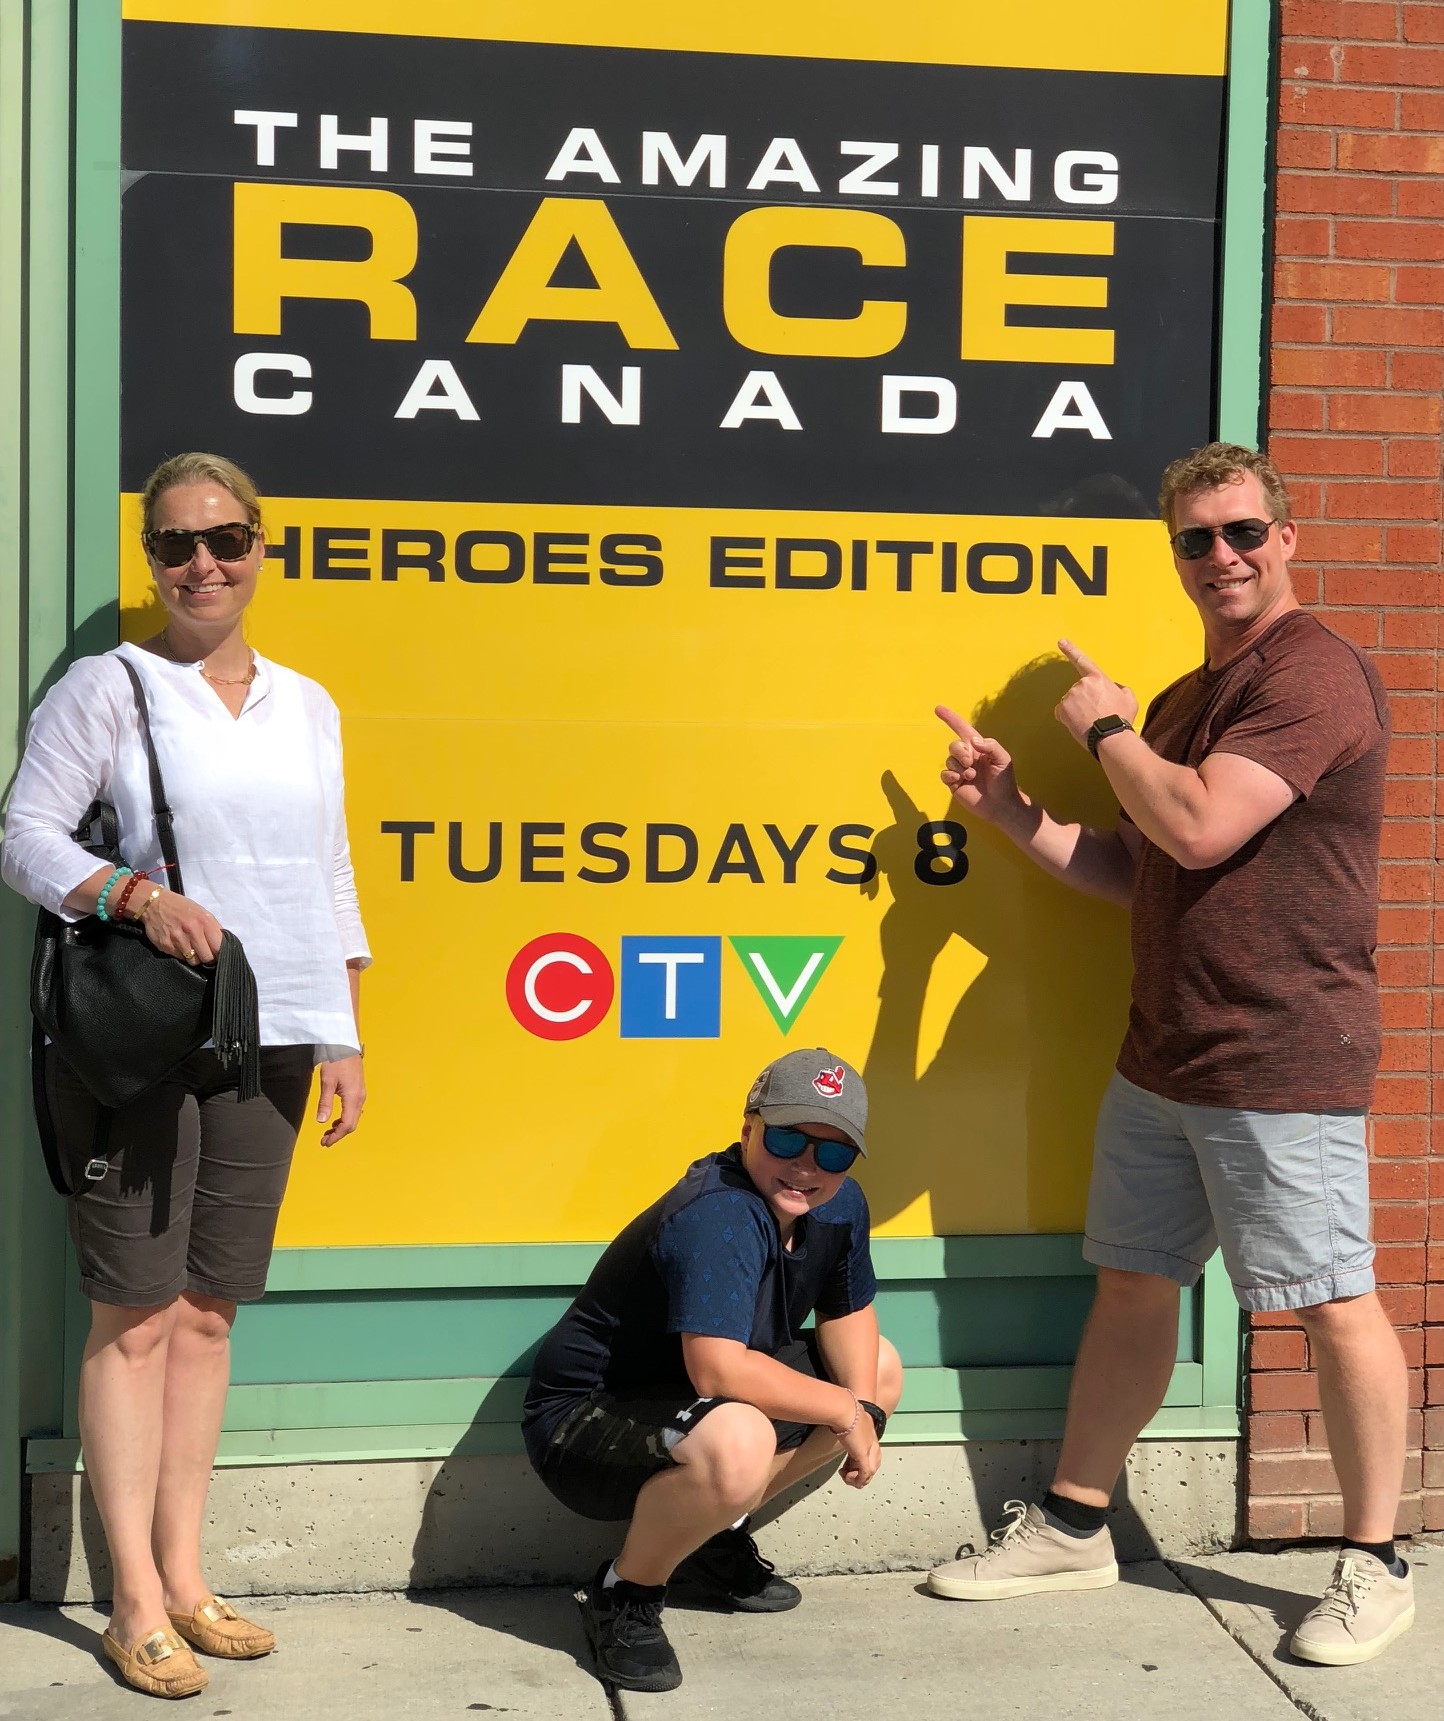 Posing with and Amazing Race Canada promotional sign